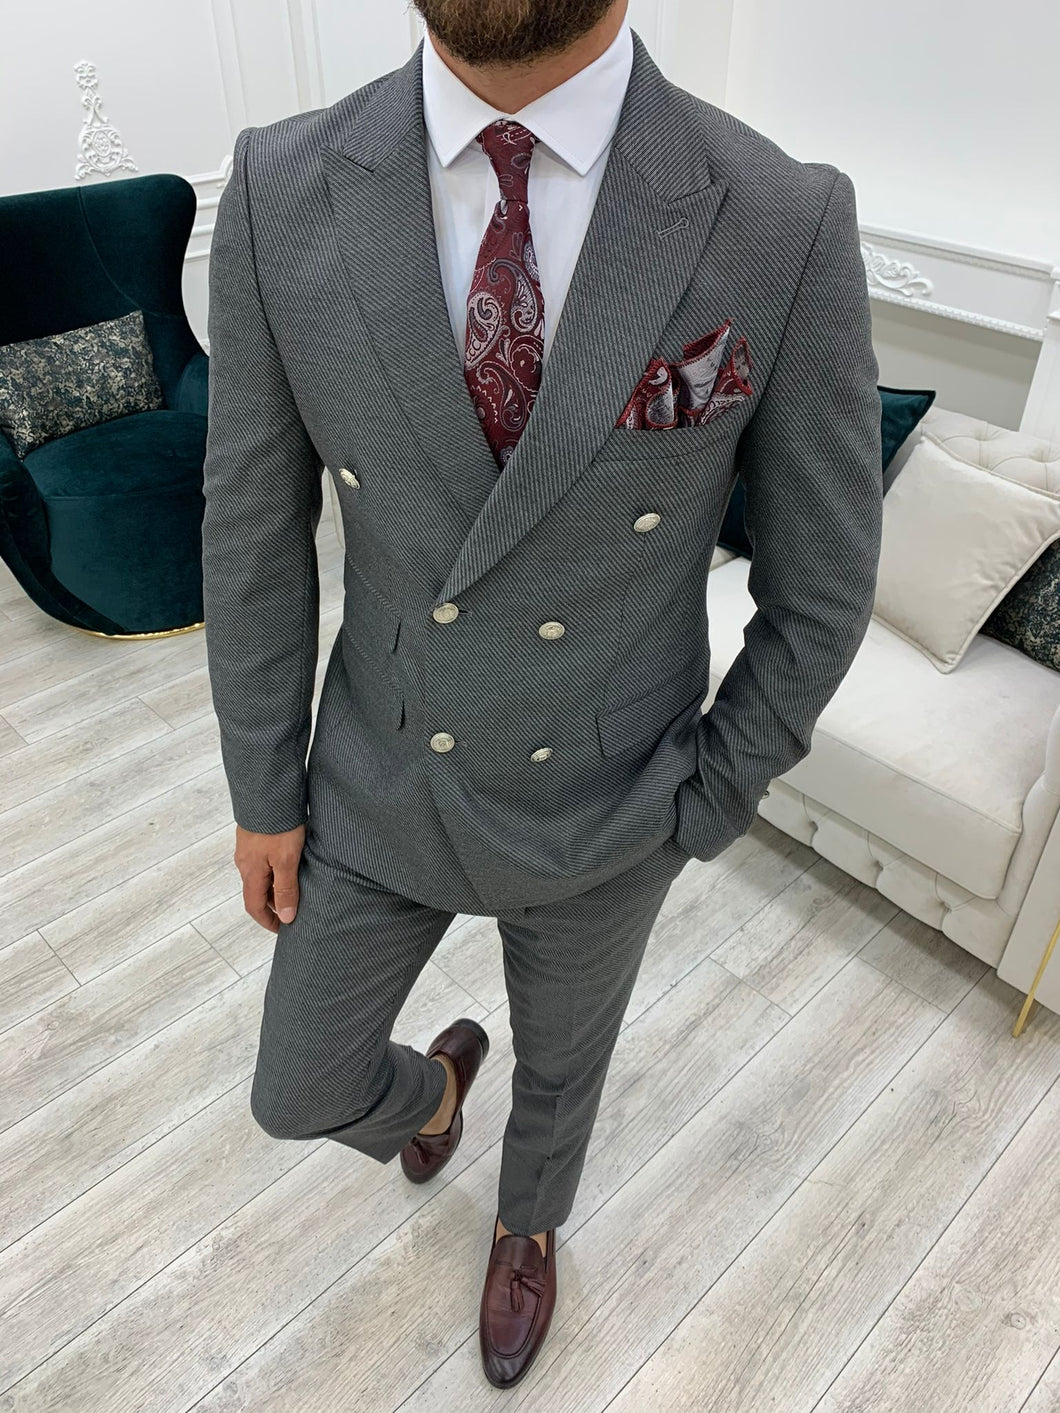 Vince Slim Fit Double Breasted Grey Suit